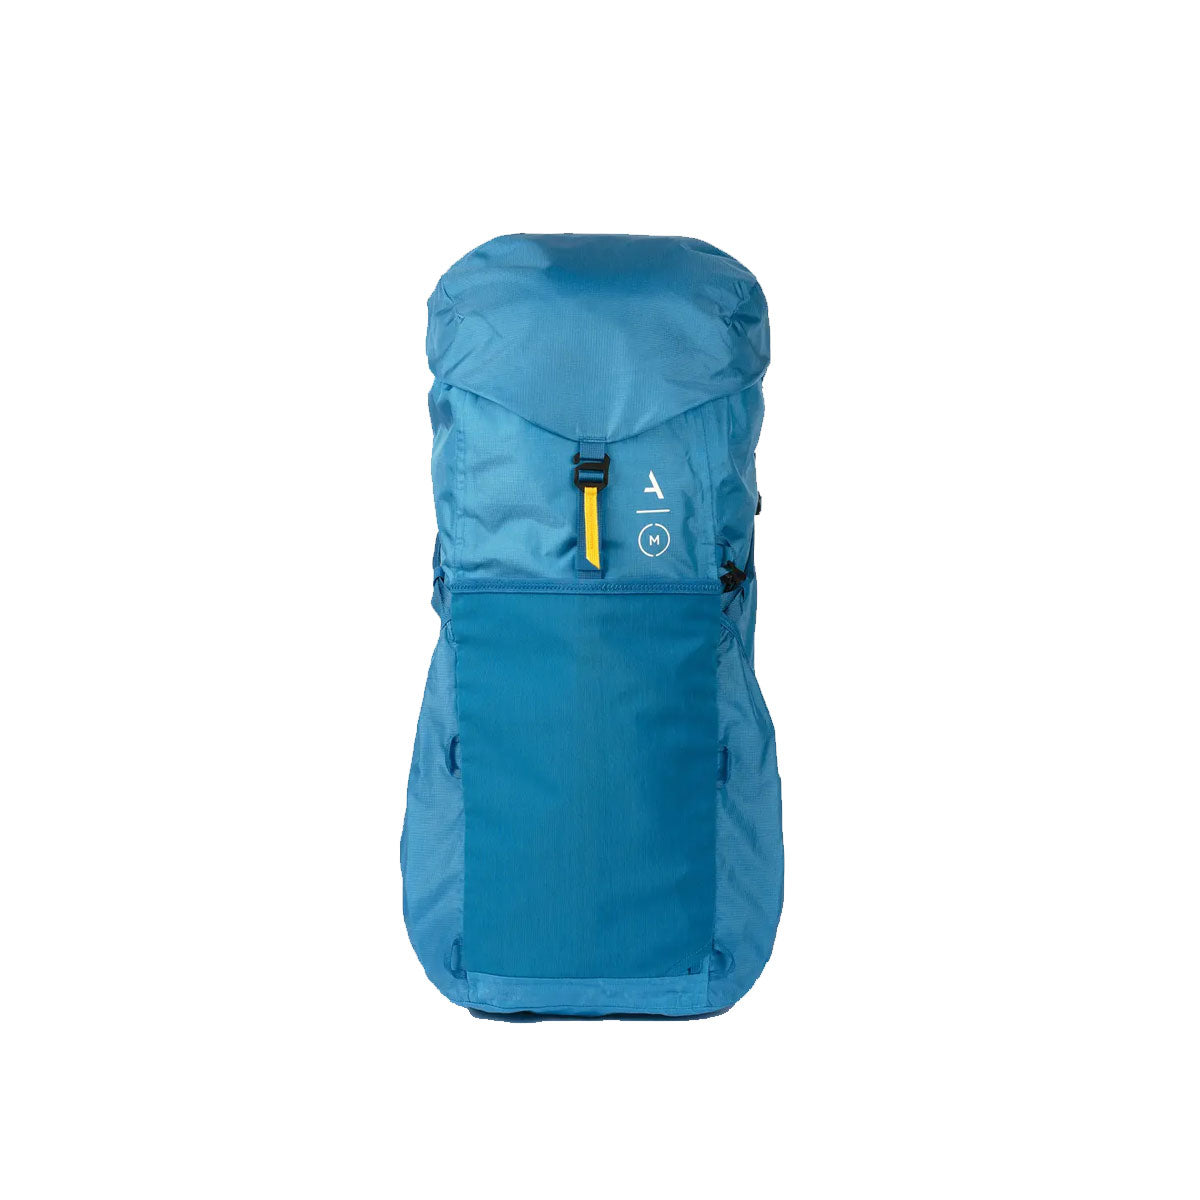 Moment : Strohl Mountain Light 45L Backpack : Blue